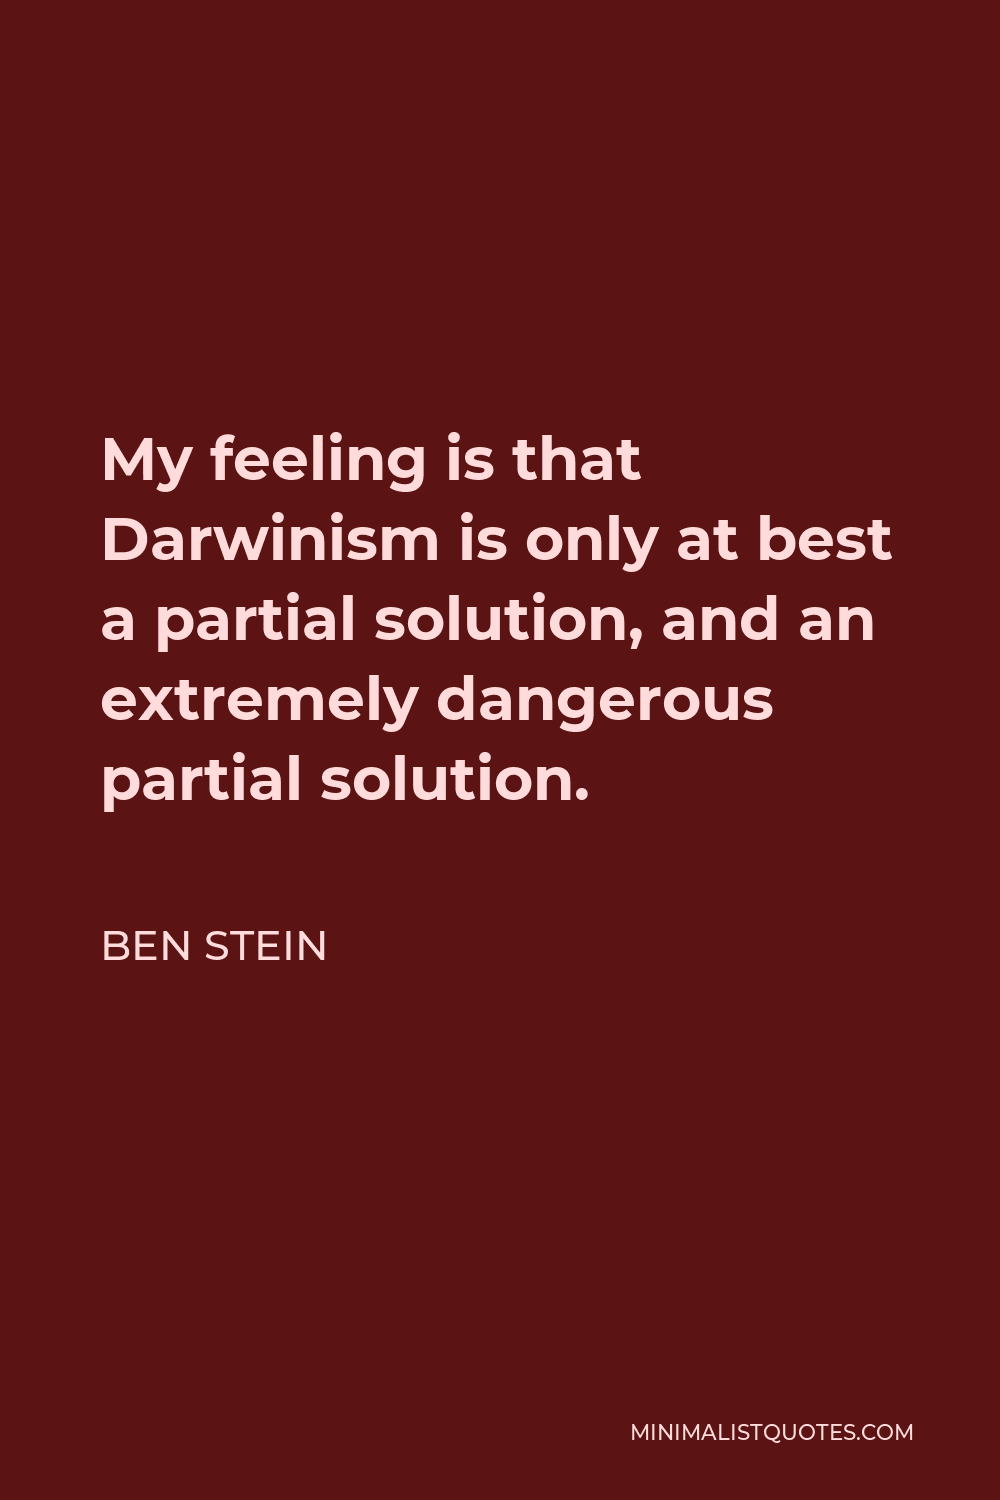 Ben Stein Quote - My feeling is that Darwinism is only at best a partial solution, and an extremely dangerous partial solution.